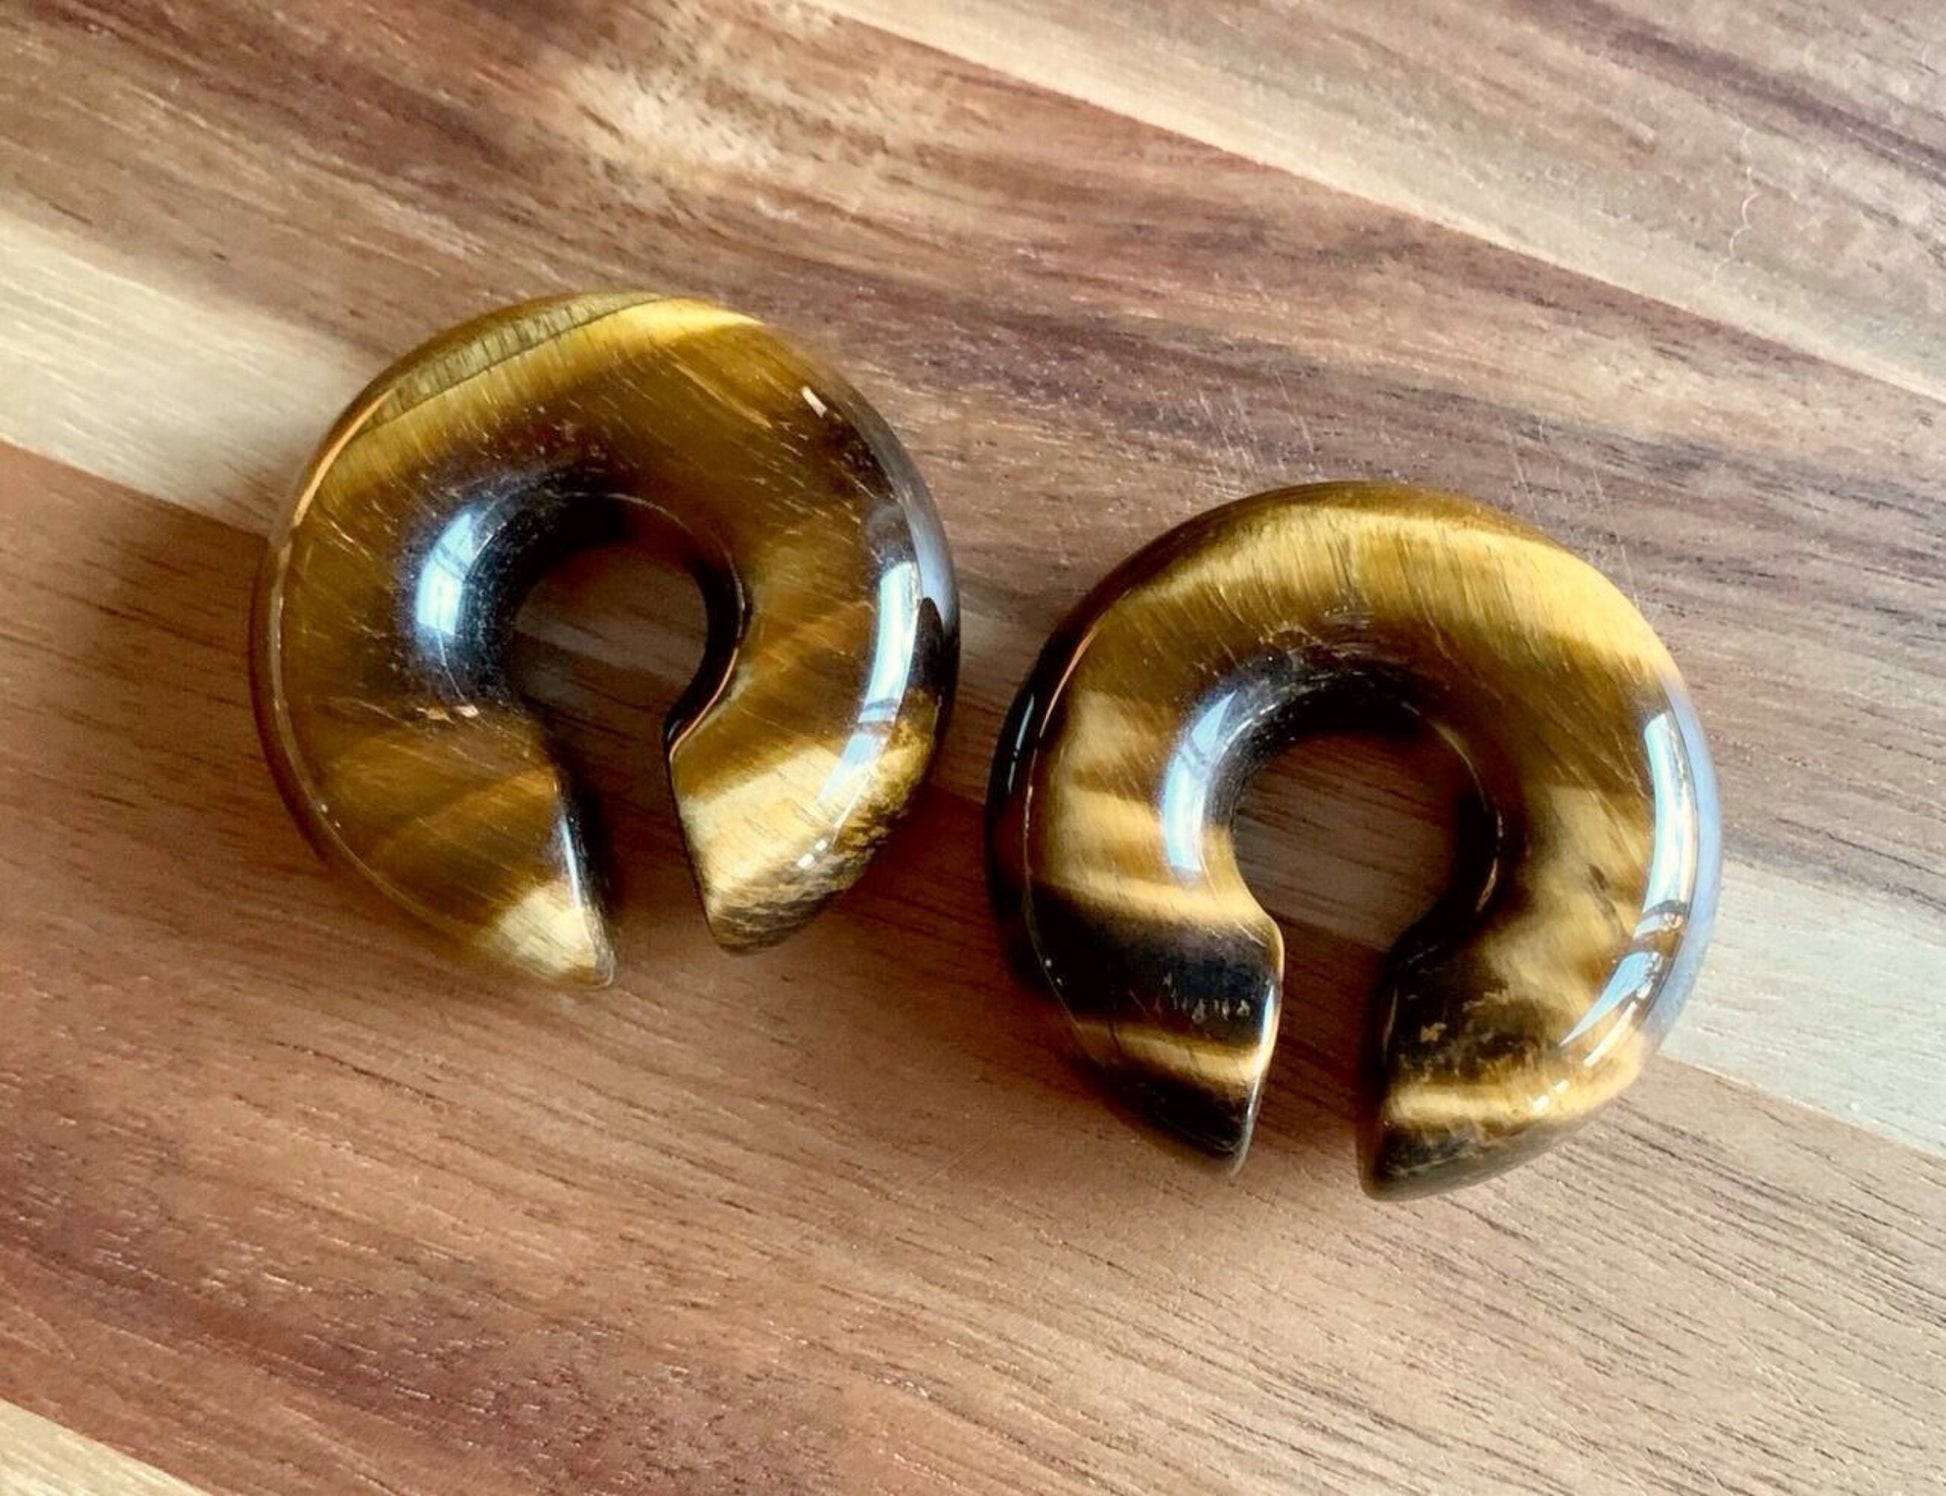 PAIR of Unique Organic Tiger Eye Stone Hoops Ear Weight Hanging Plugs - Gauges 2g (6mm) up to 5/8" (16mm) available!